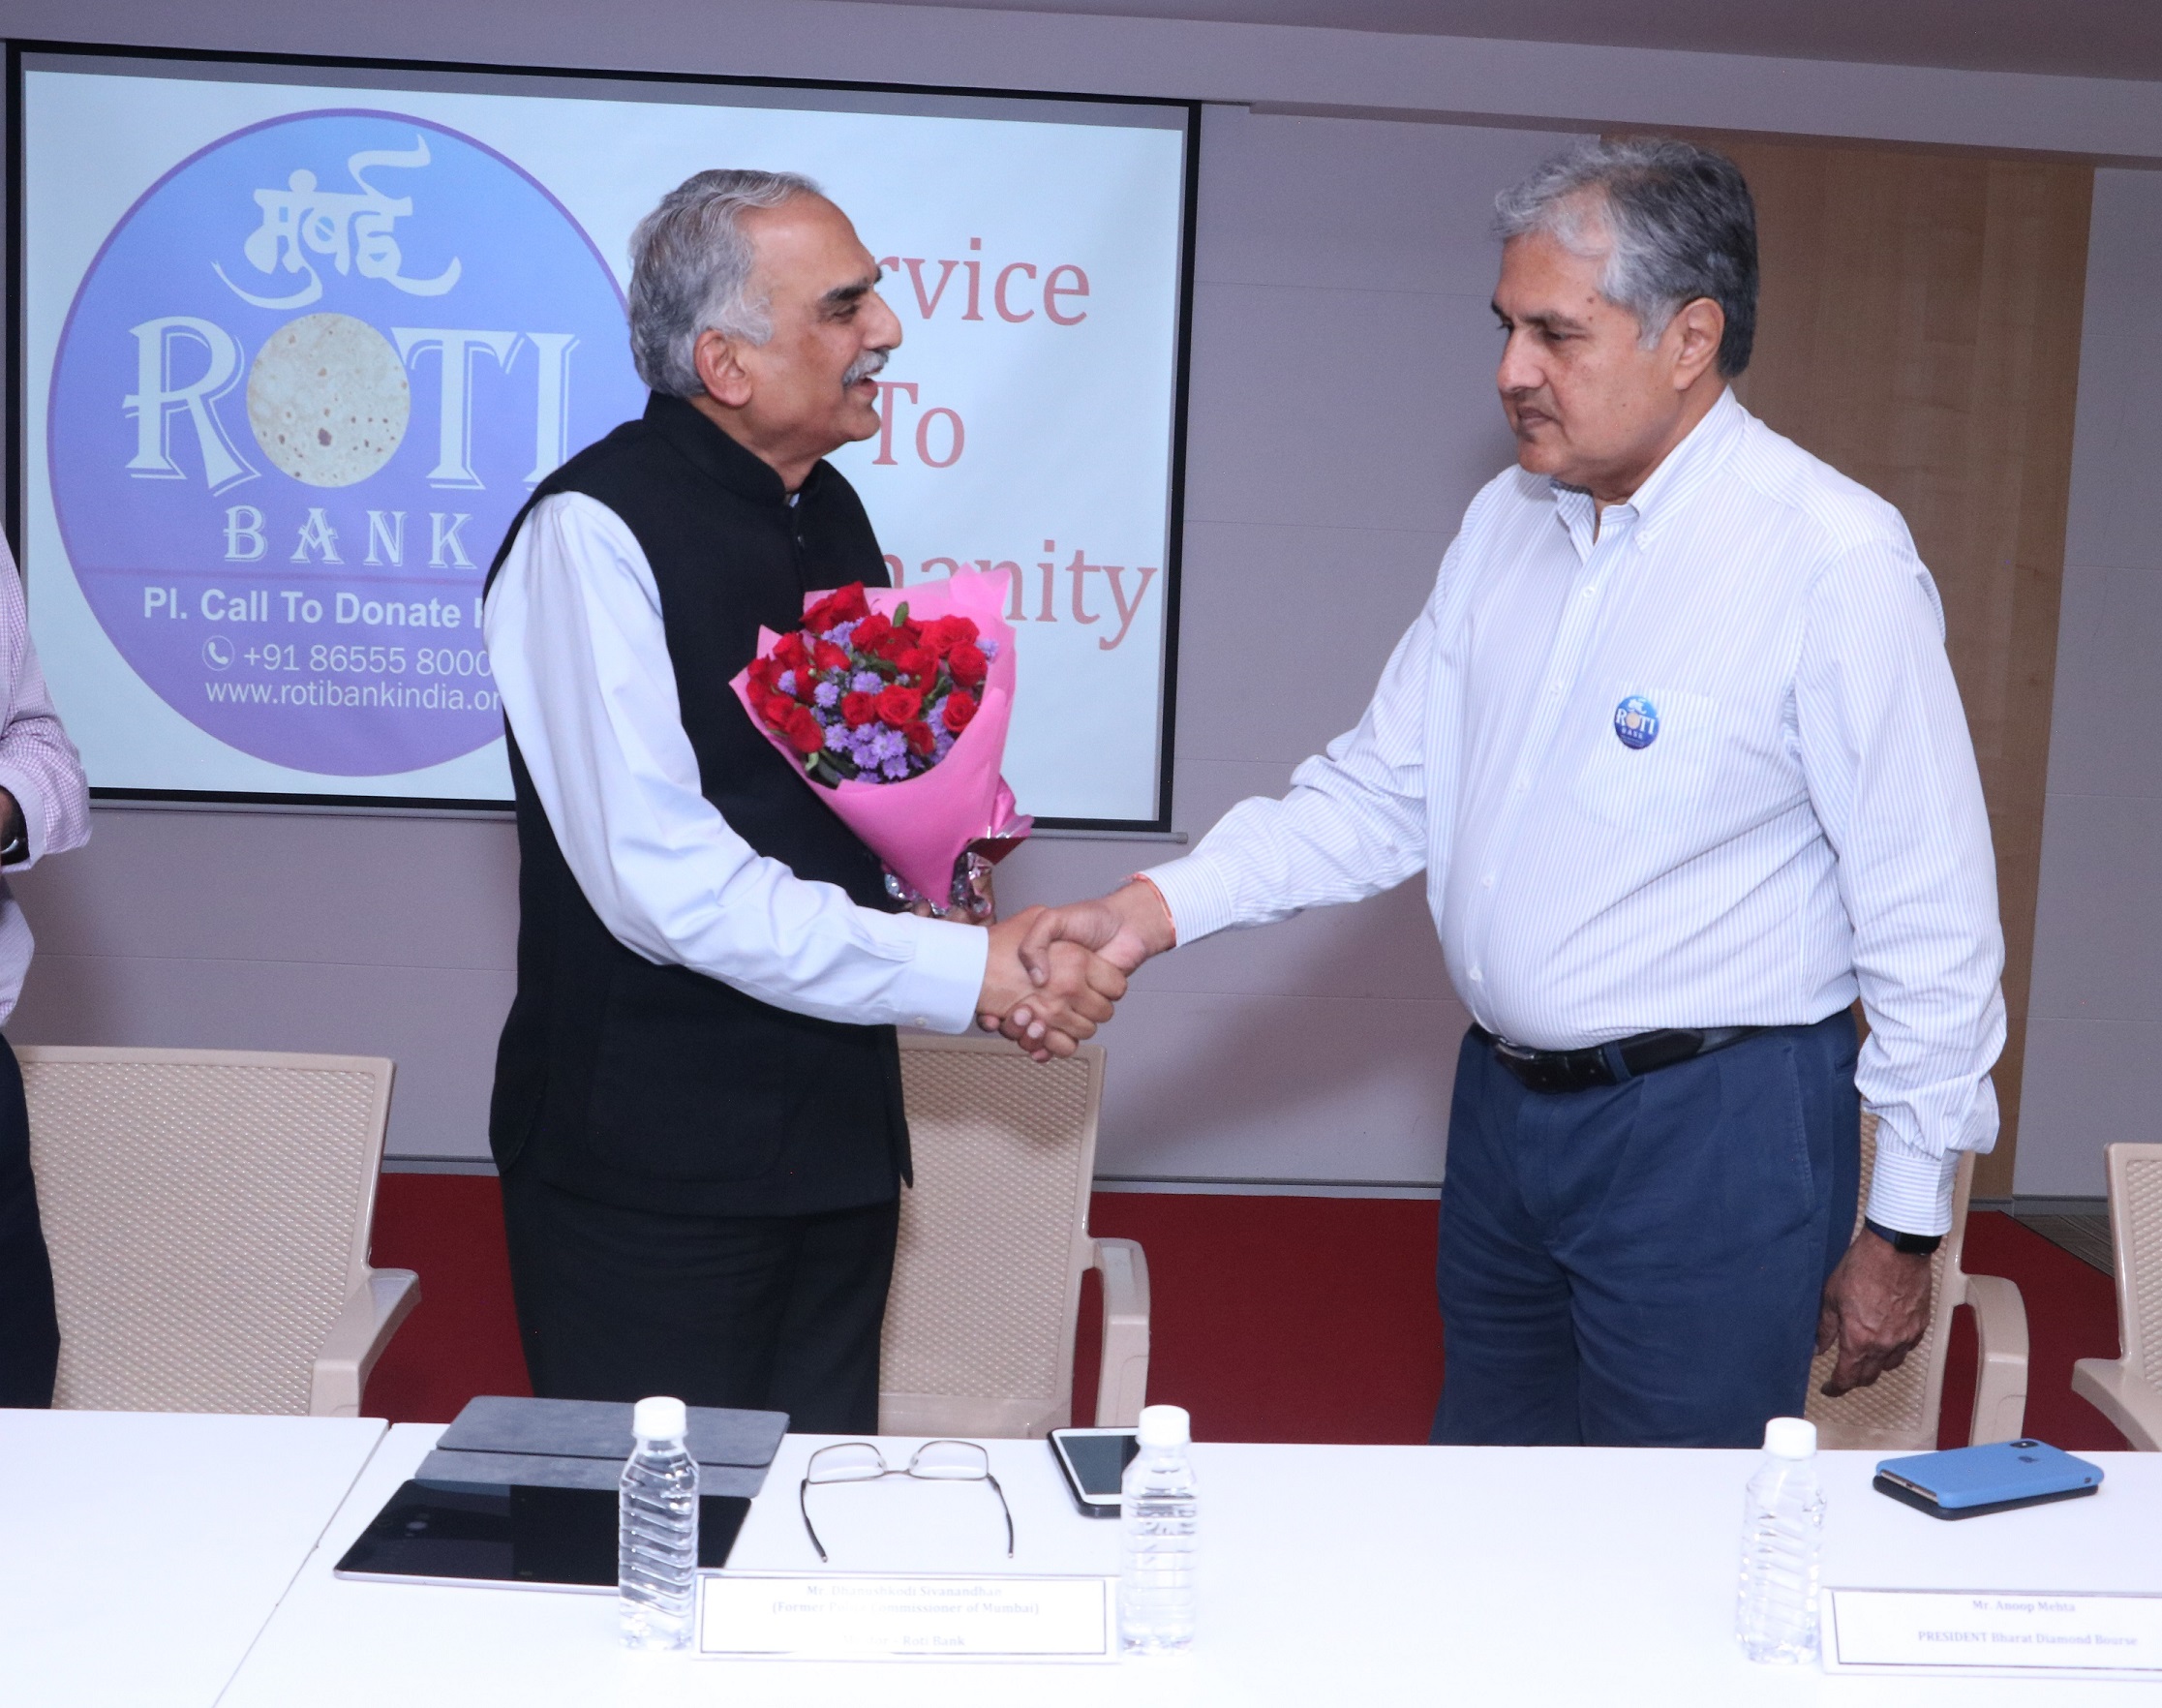 Mr Anoop Mehra, President, Bharat Diamond Bourse felicitates Shri D Sivanandhan, Mentor, Roti Bank and Former Commissioner of Police, Mumbai at an event organised today in Mumbai. Gems and Jewellery National Relief Foundation (GJNRF) along with Bharat Diamond Bourse (BDB) today donated 2 vans to Roti Bank. - Photo By GPN